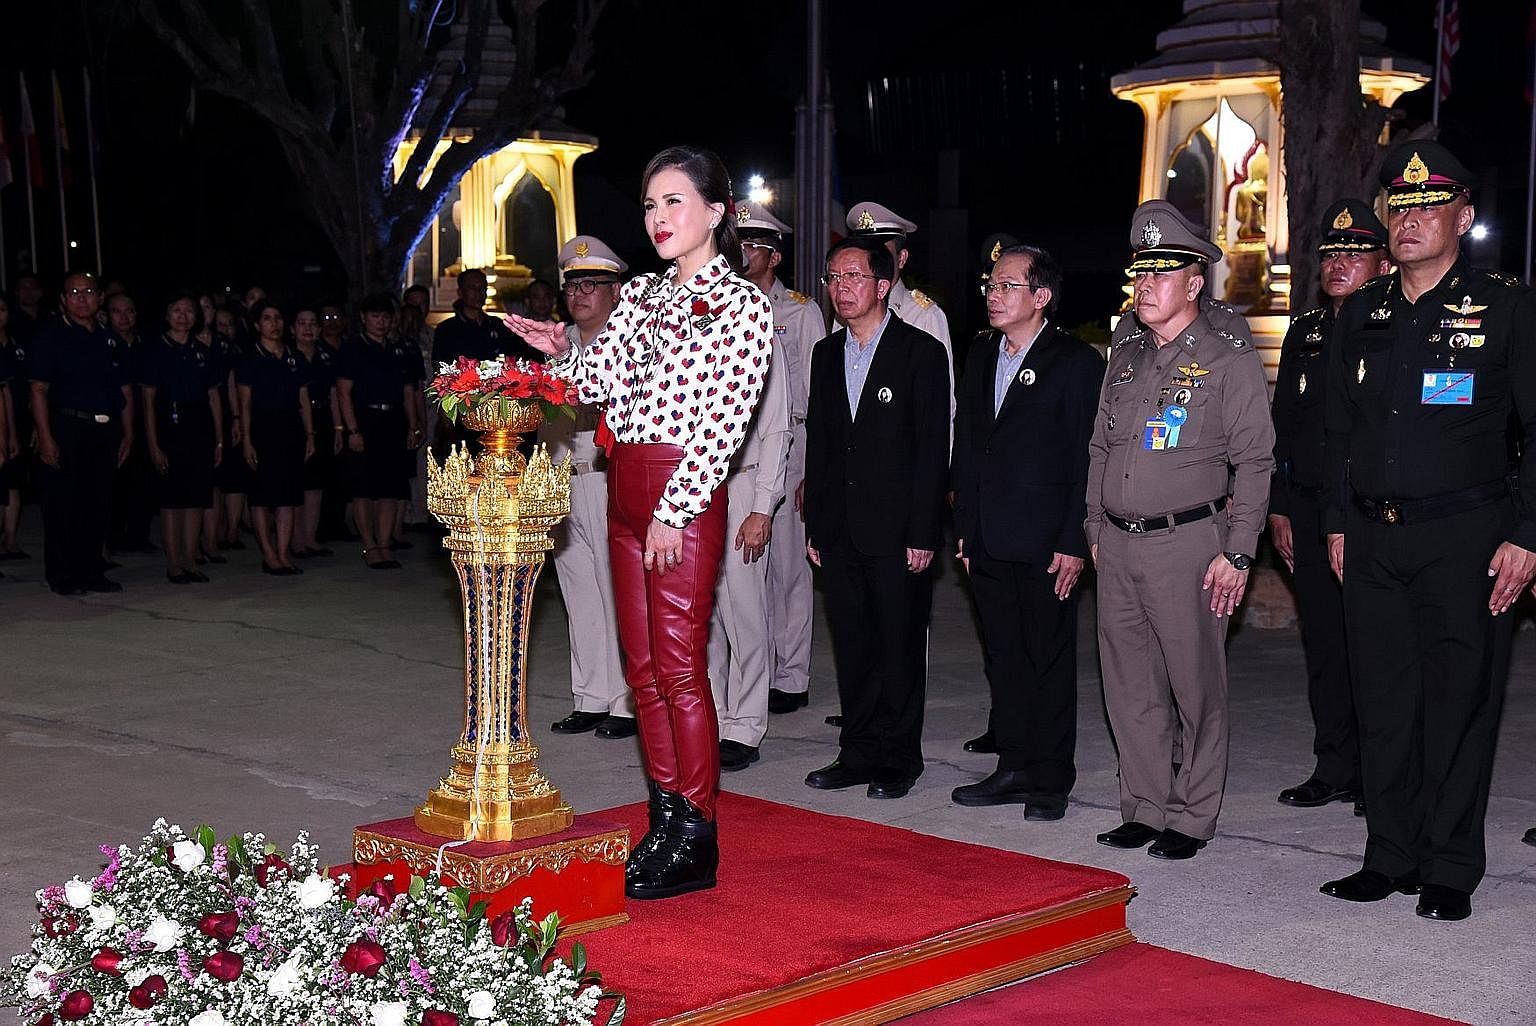 Princess Ubolratana Rajakanya officiating at the opening of a centre for the To Be Number One anti-drug and youth development project at Phichit Pittayakom school on Thursday.